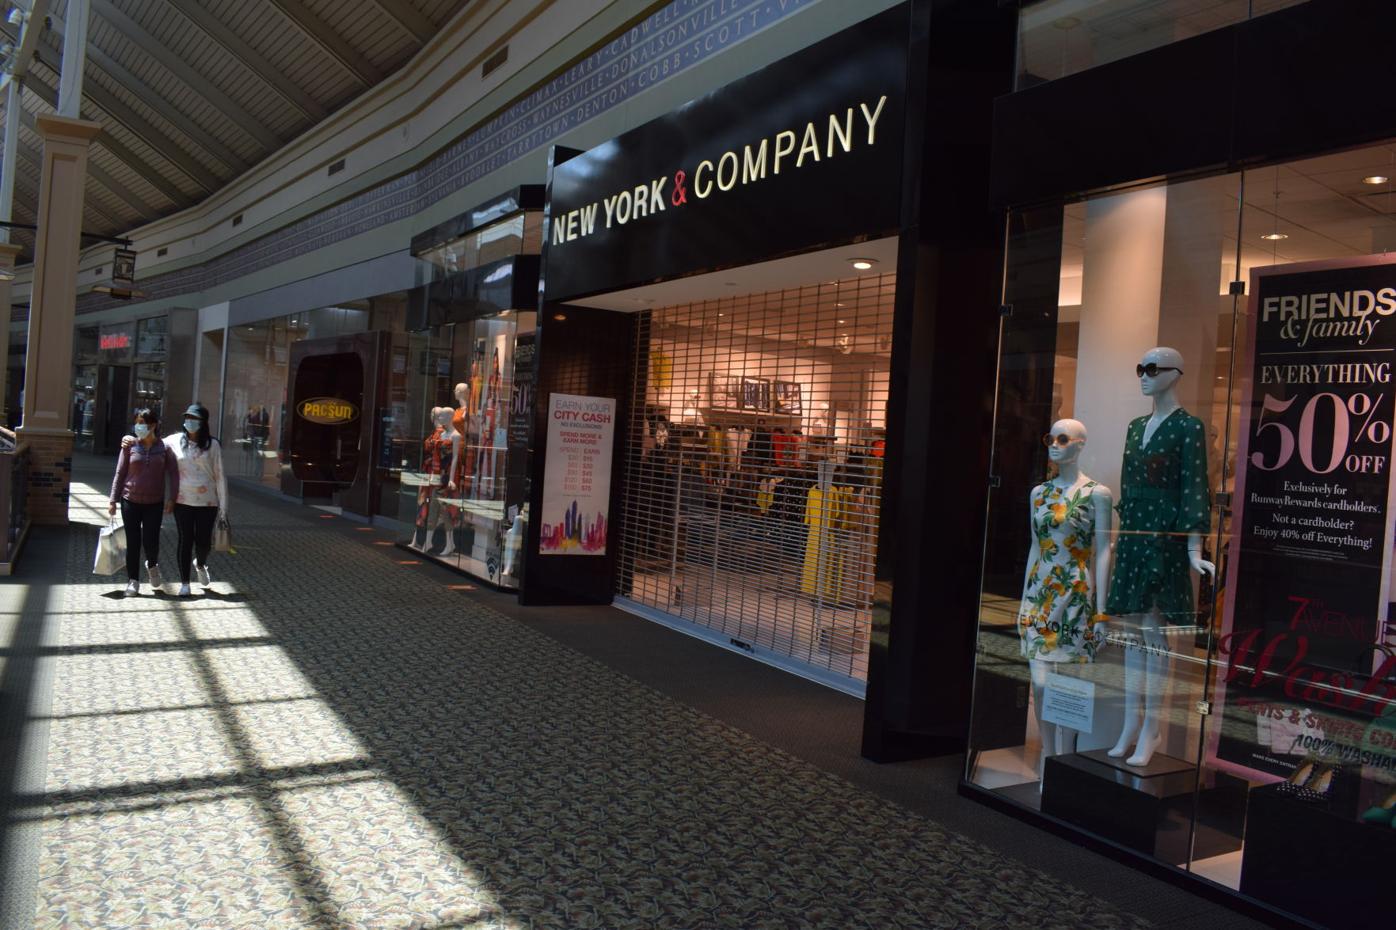 Potomac Mills mall plans to reopen Friday, but with big changes, Headlines